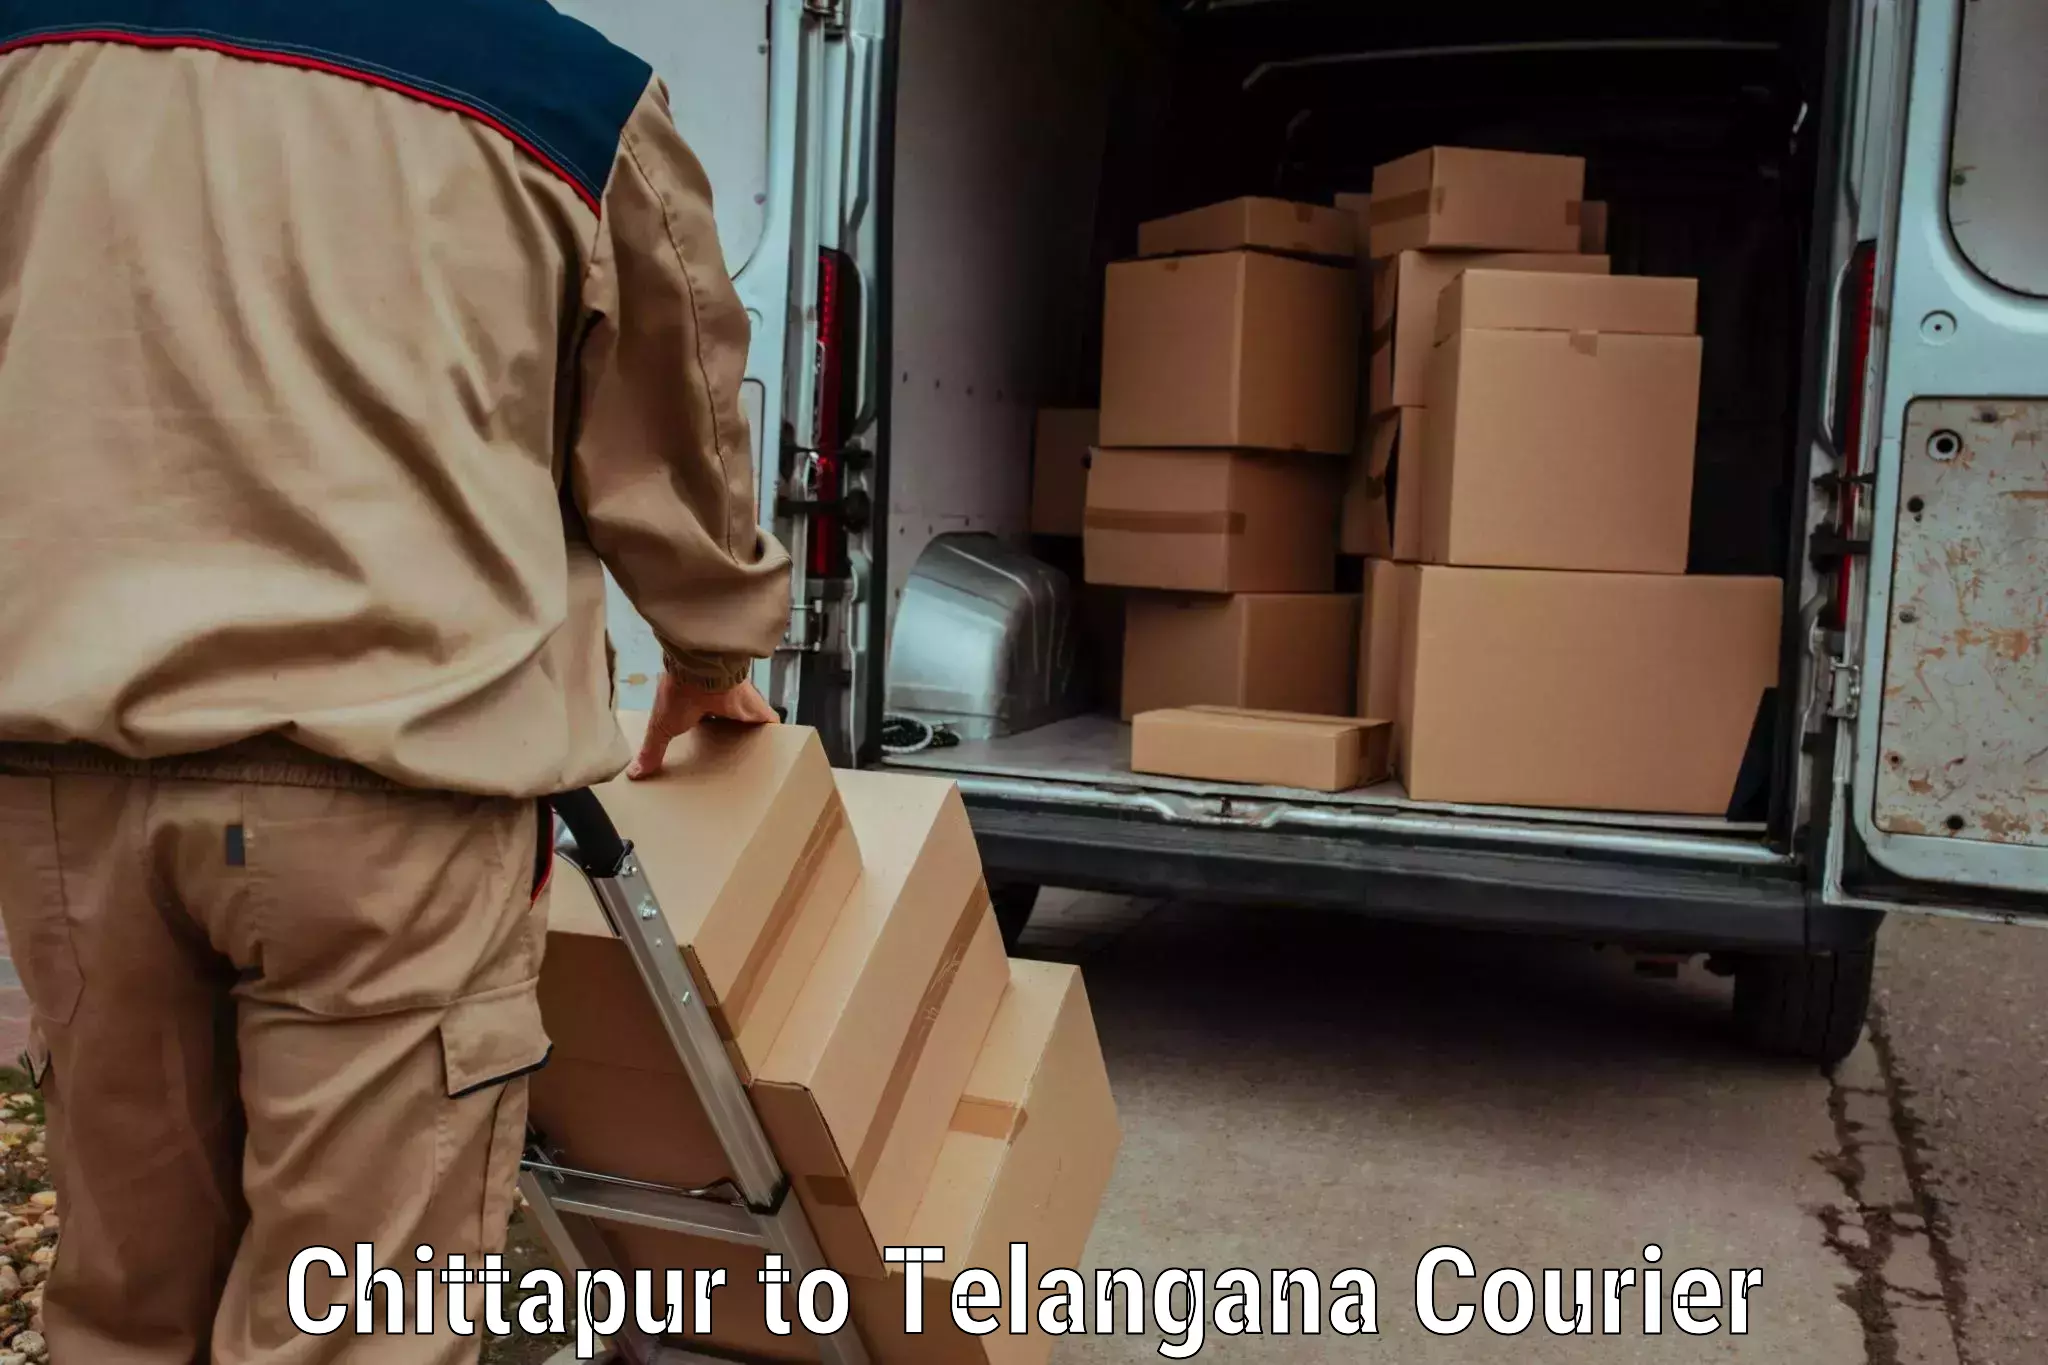 User-friendly delivery service Chittapur to Allapalli